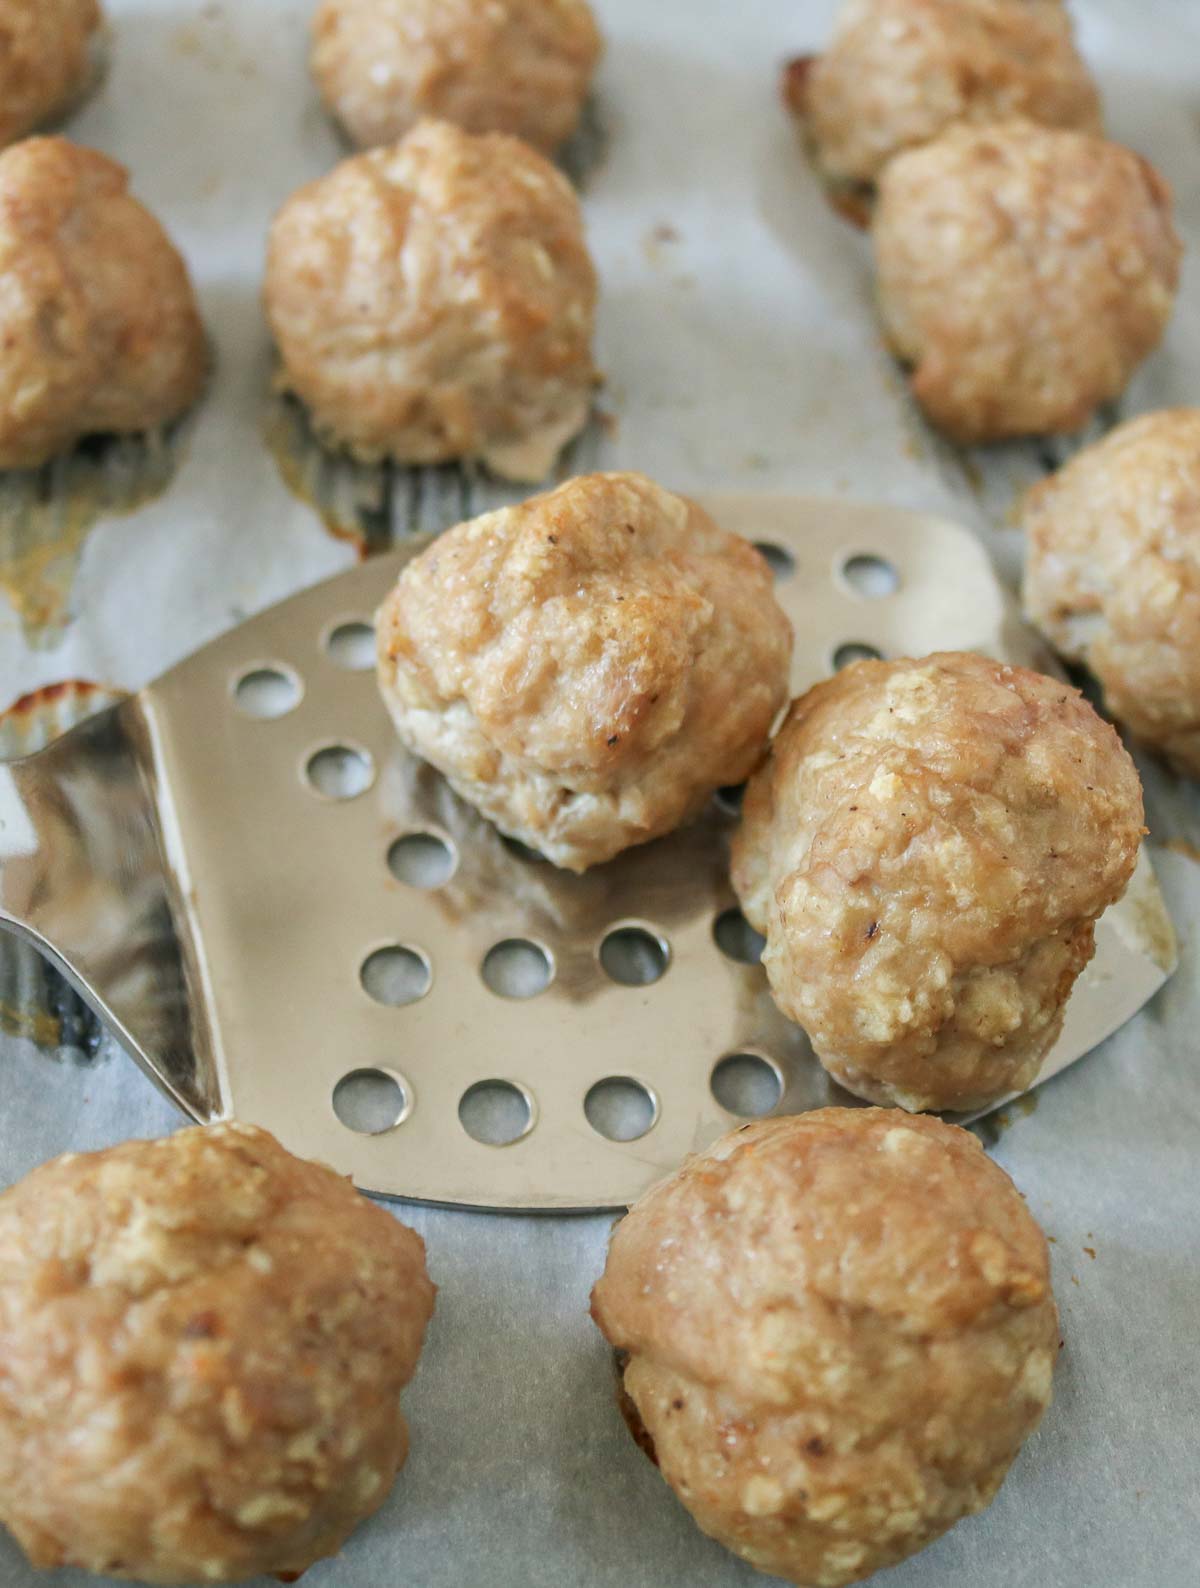 Spatula scooping up baked turkey meatballs from a parchment paper-lined sheet pan.